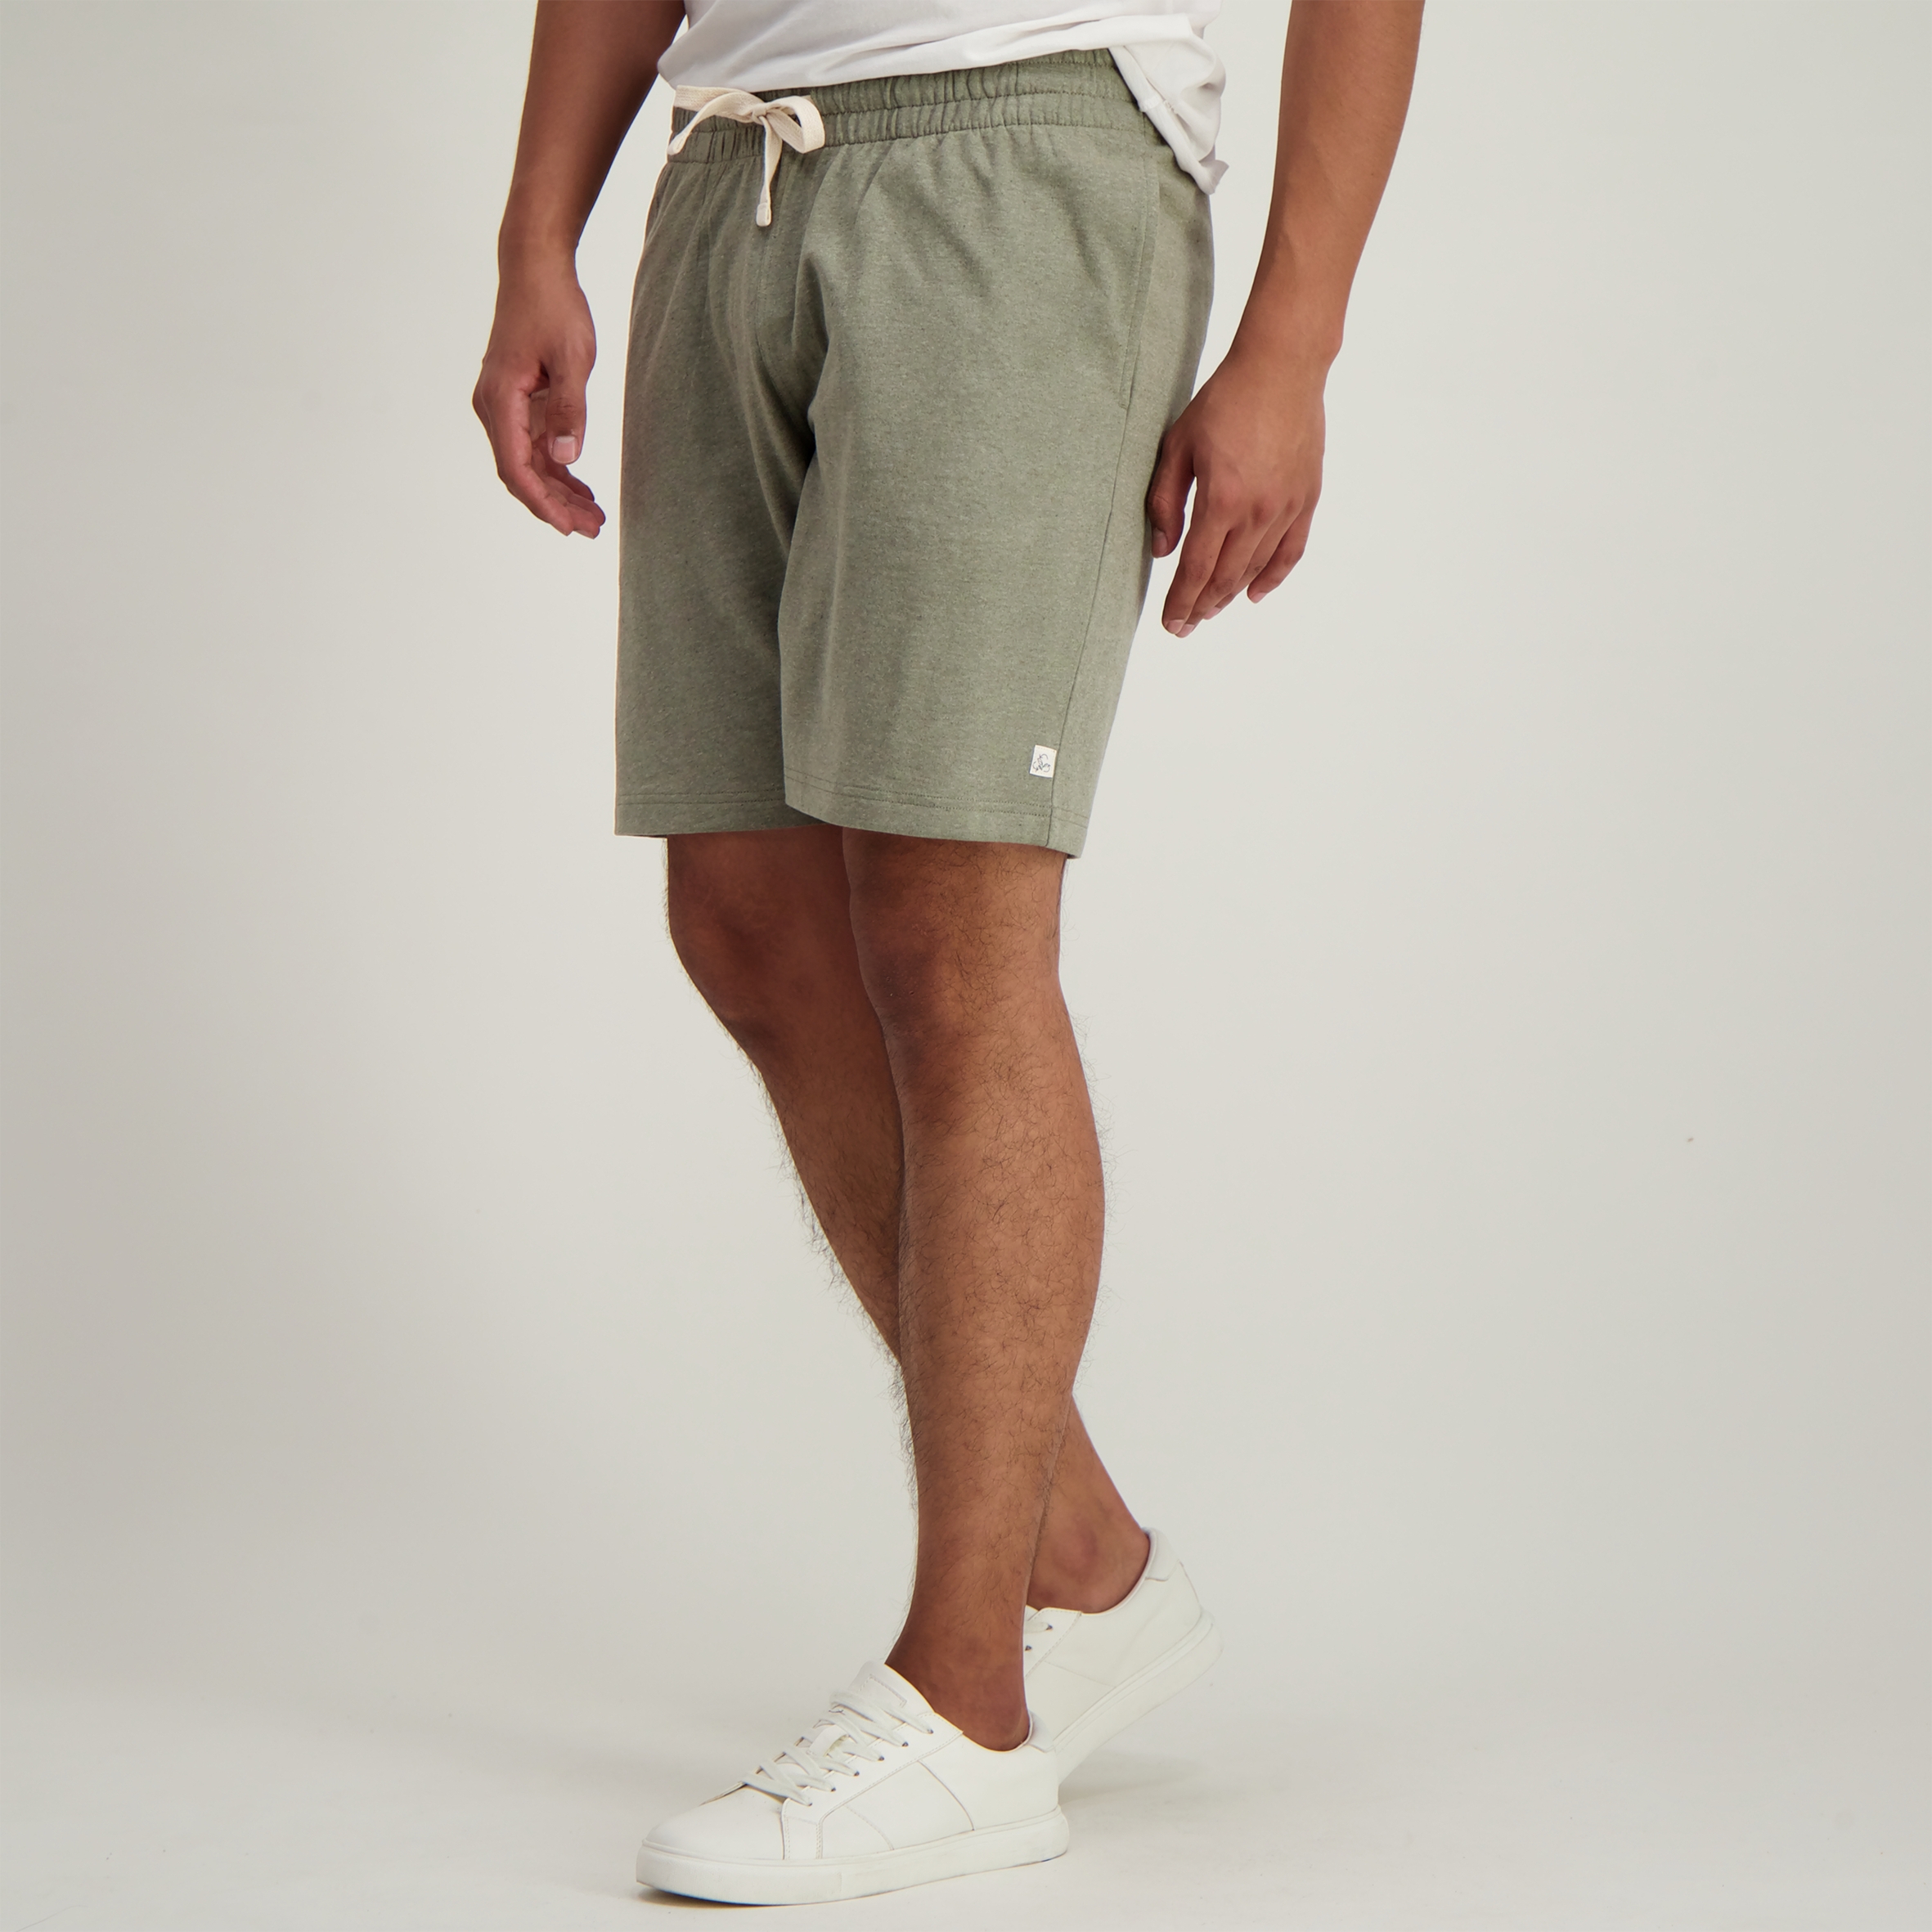 H&H Men's Recycled Knit Shorts